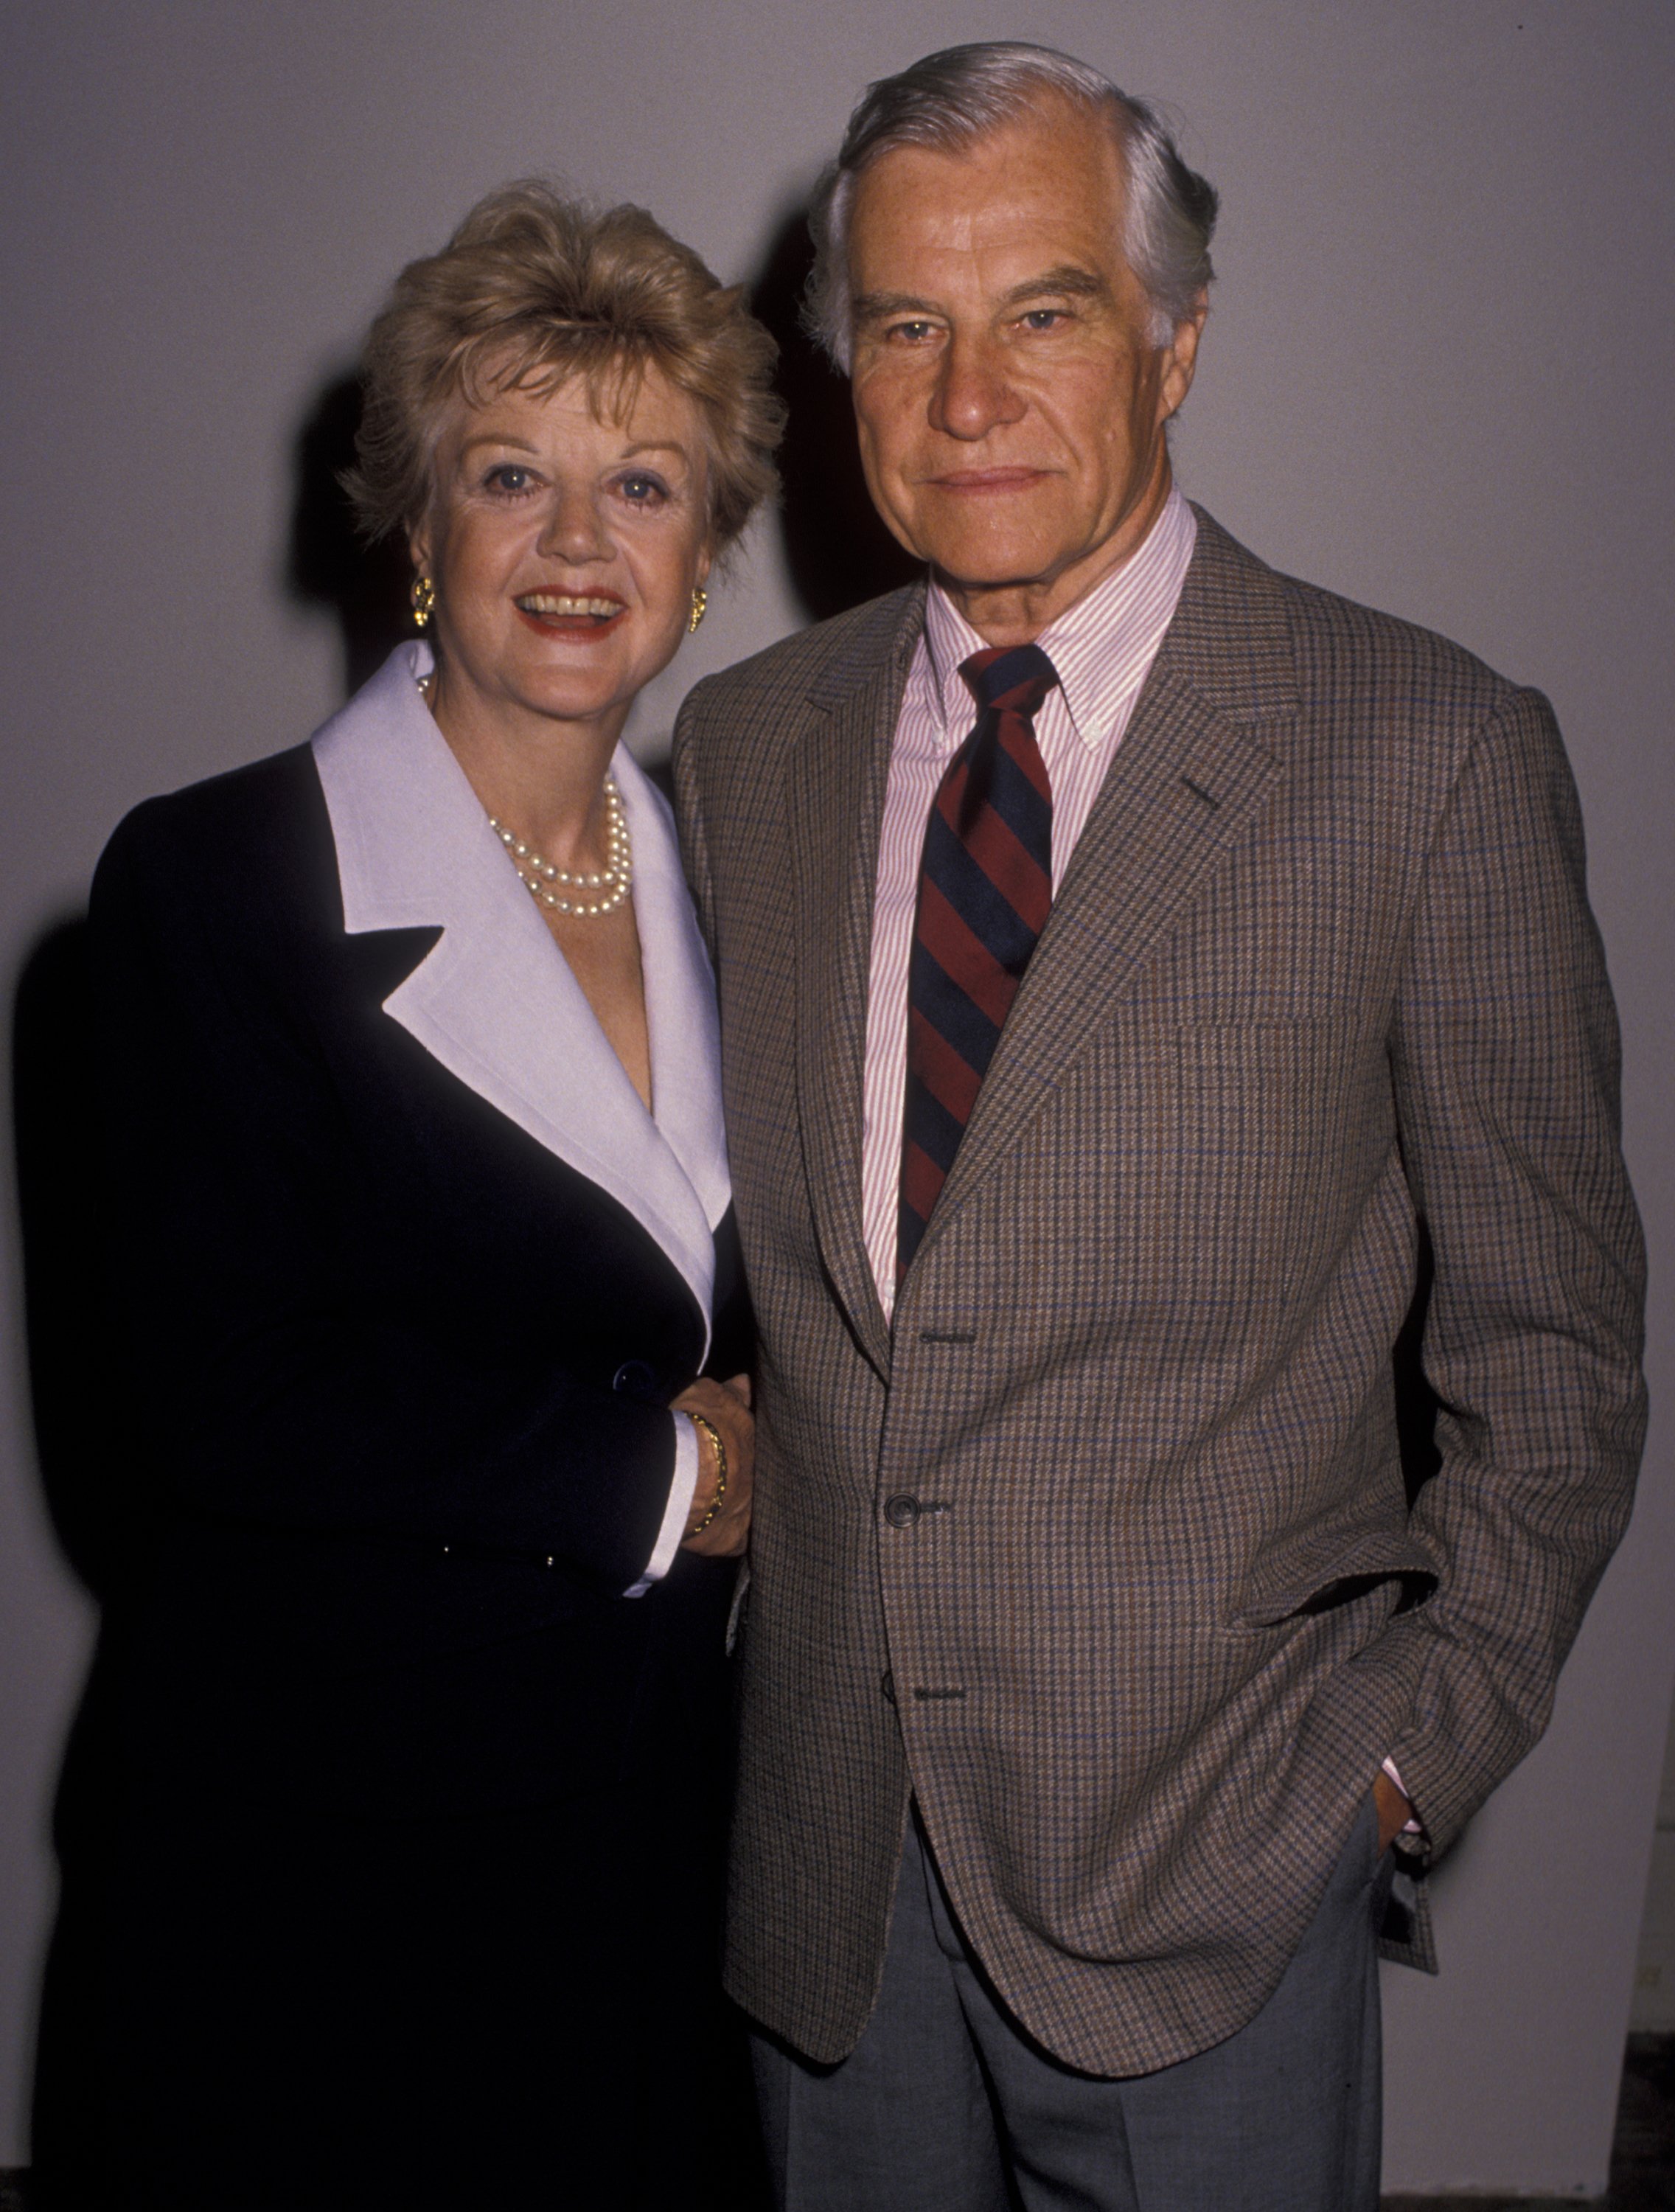 Angela Lansbury and Peter Shaw in Beverly Hills 1990. | Source: Getty Images